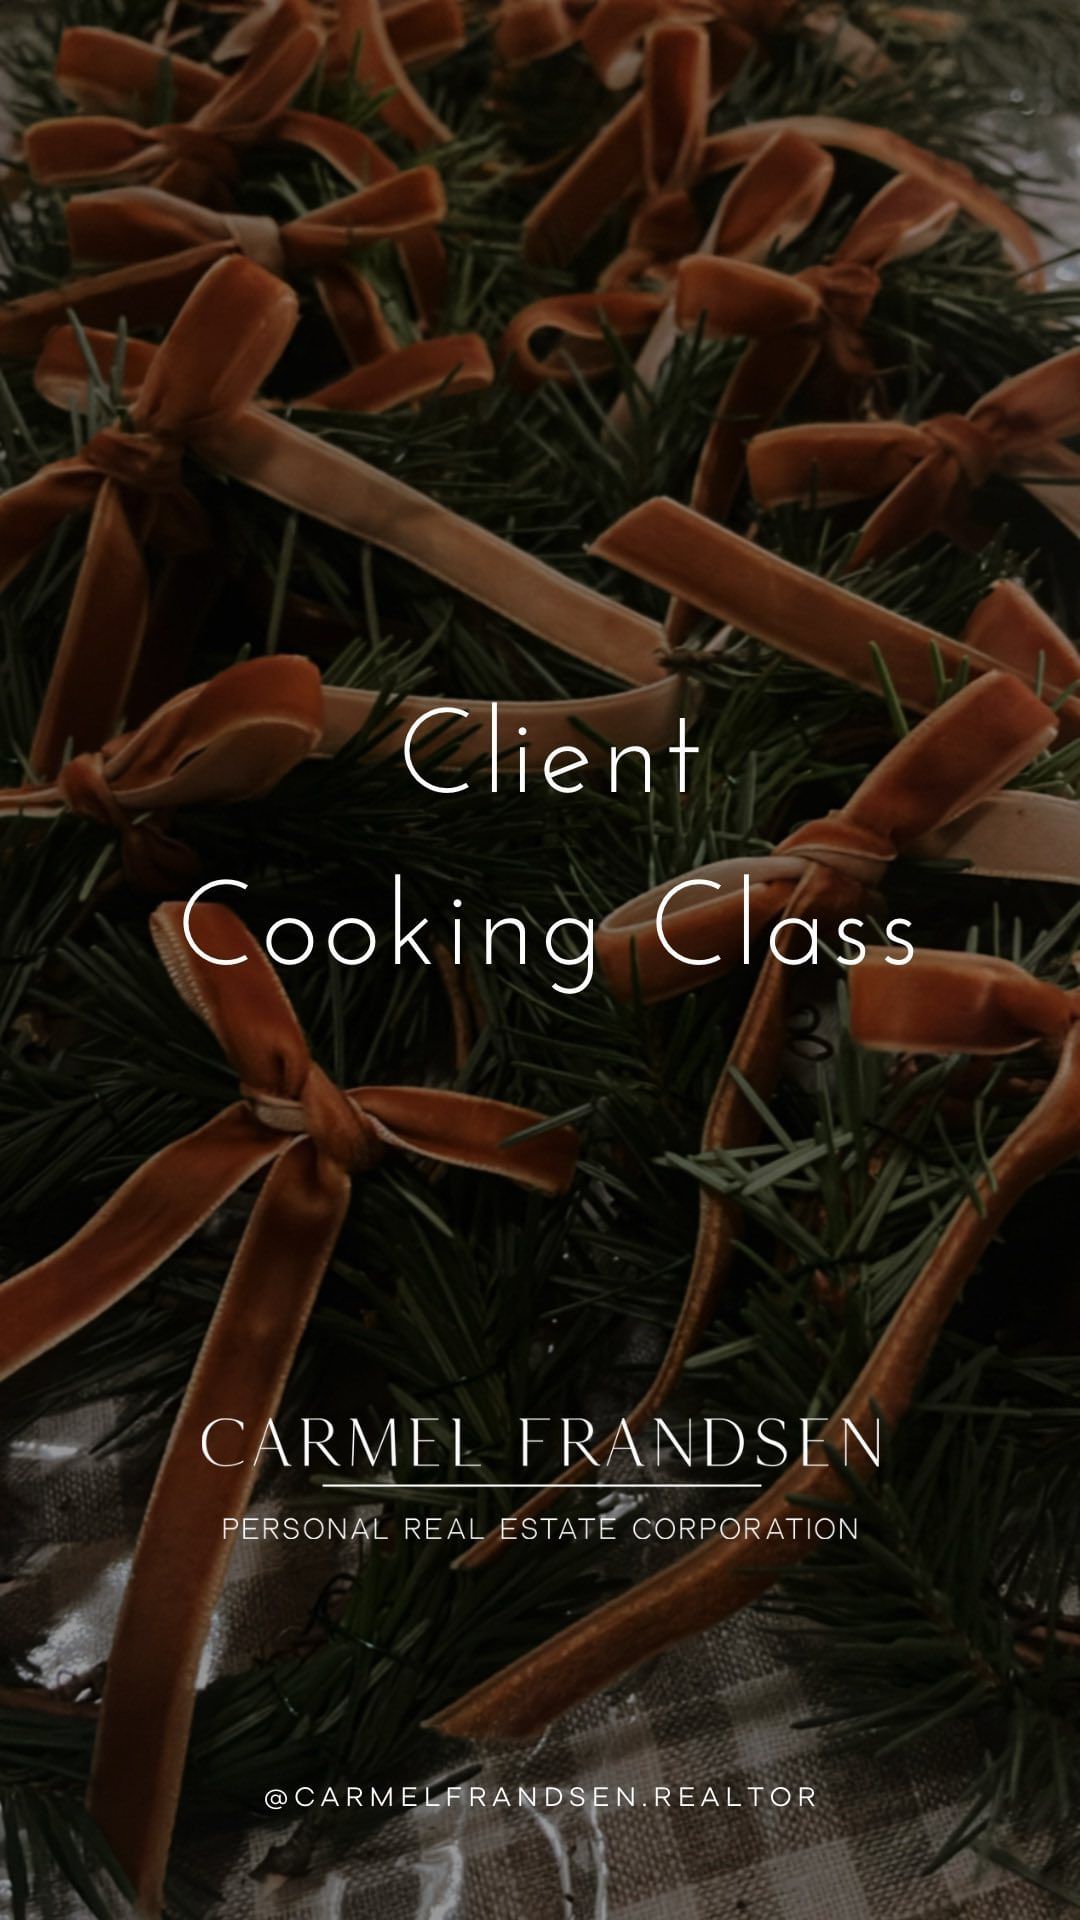 Holiday Gnocchi Cooking Class delight! 🎄🍝 A heartfelt thank you to @caserec...